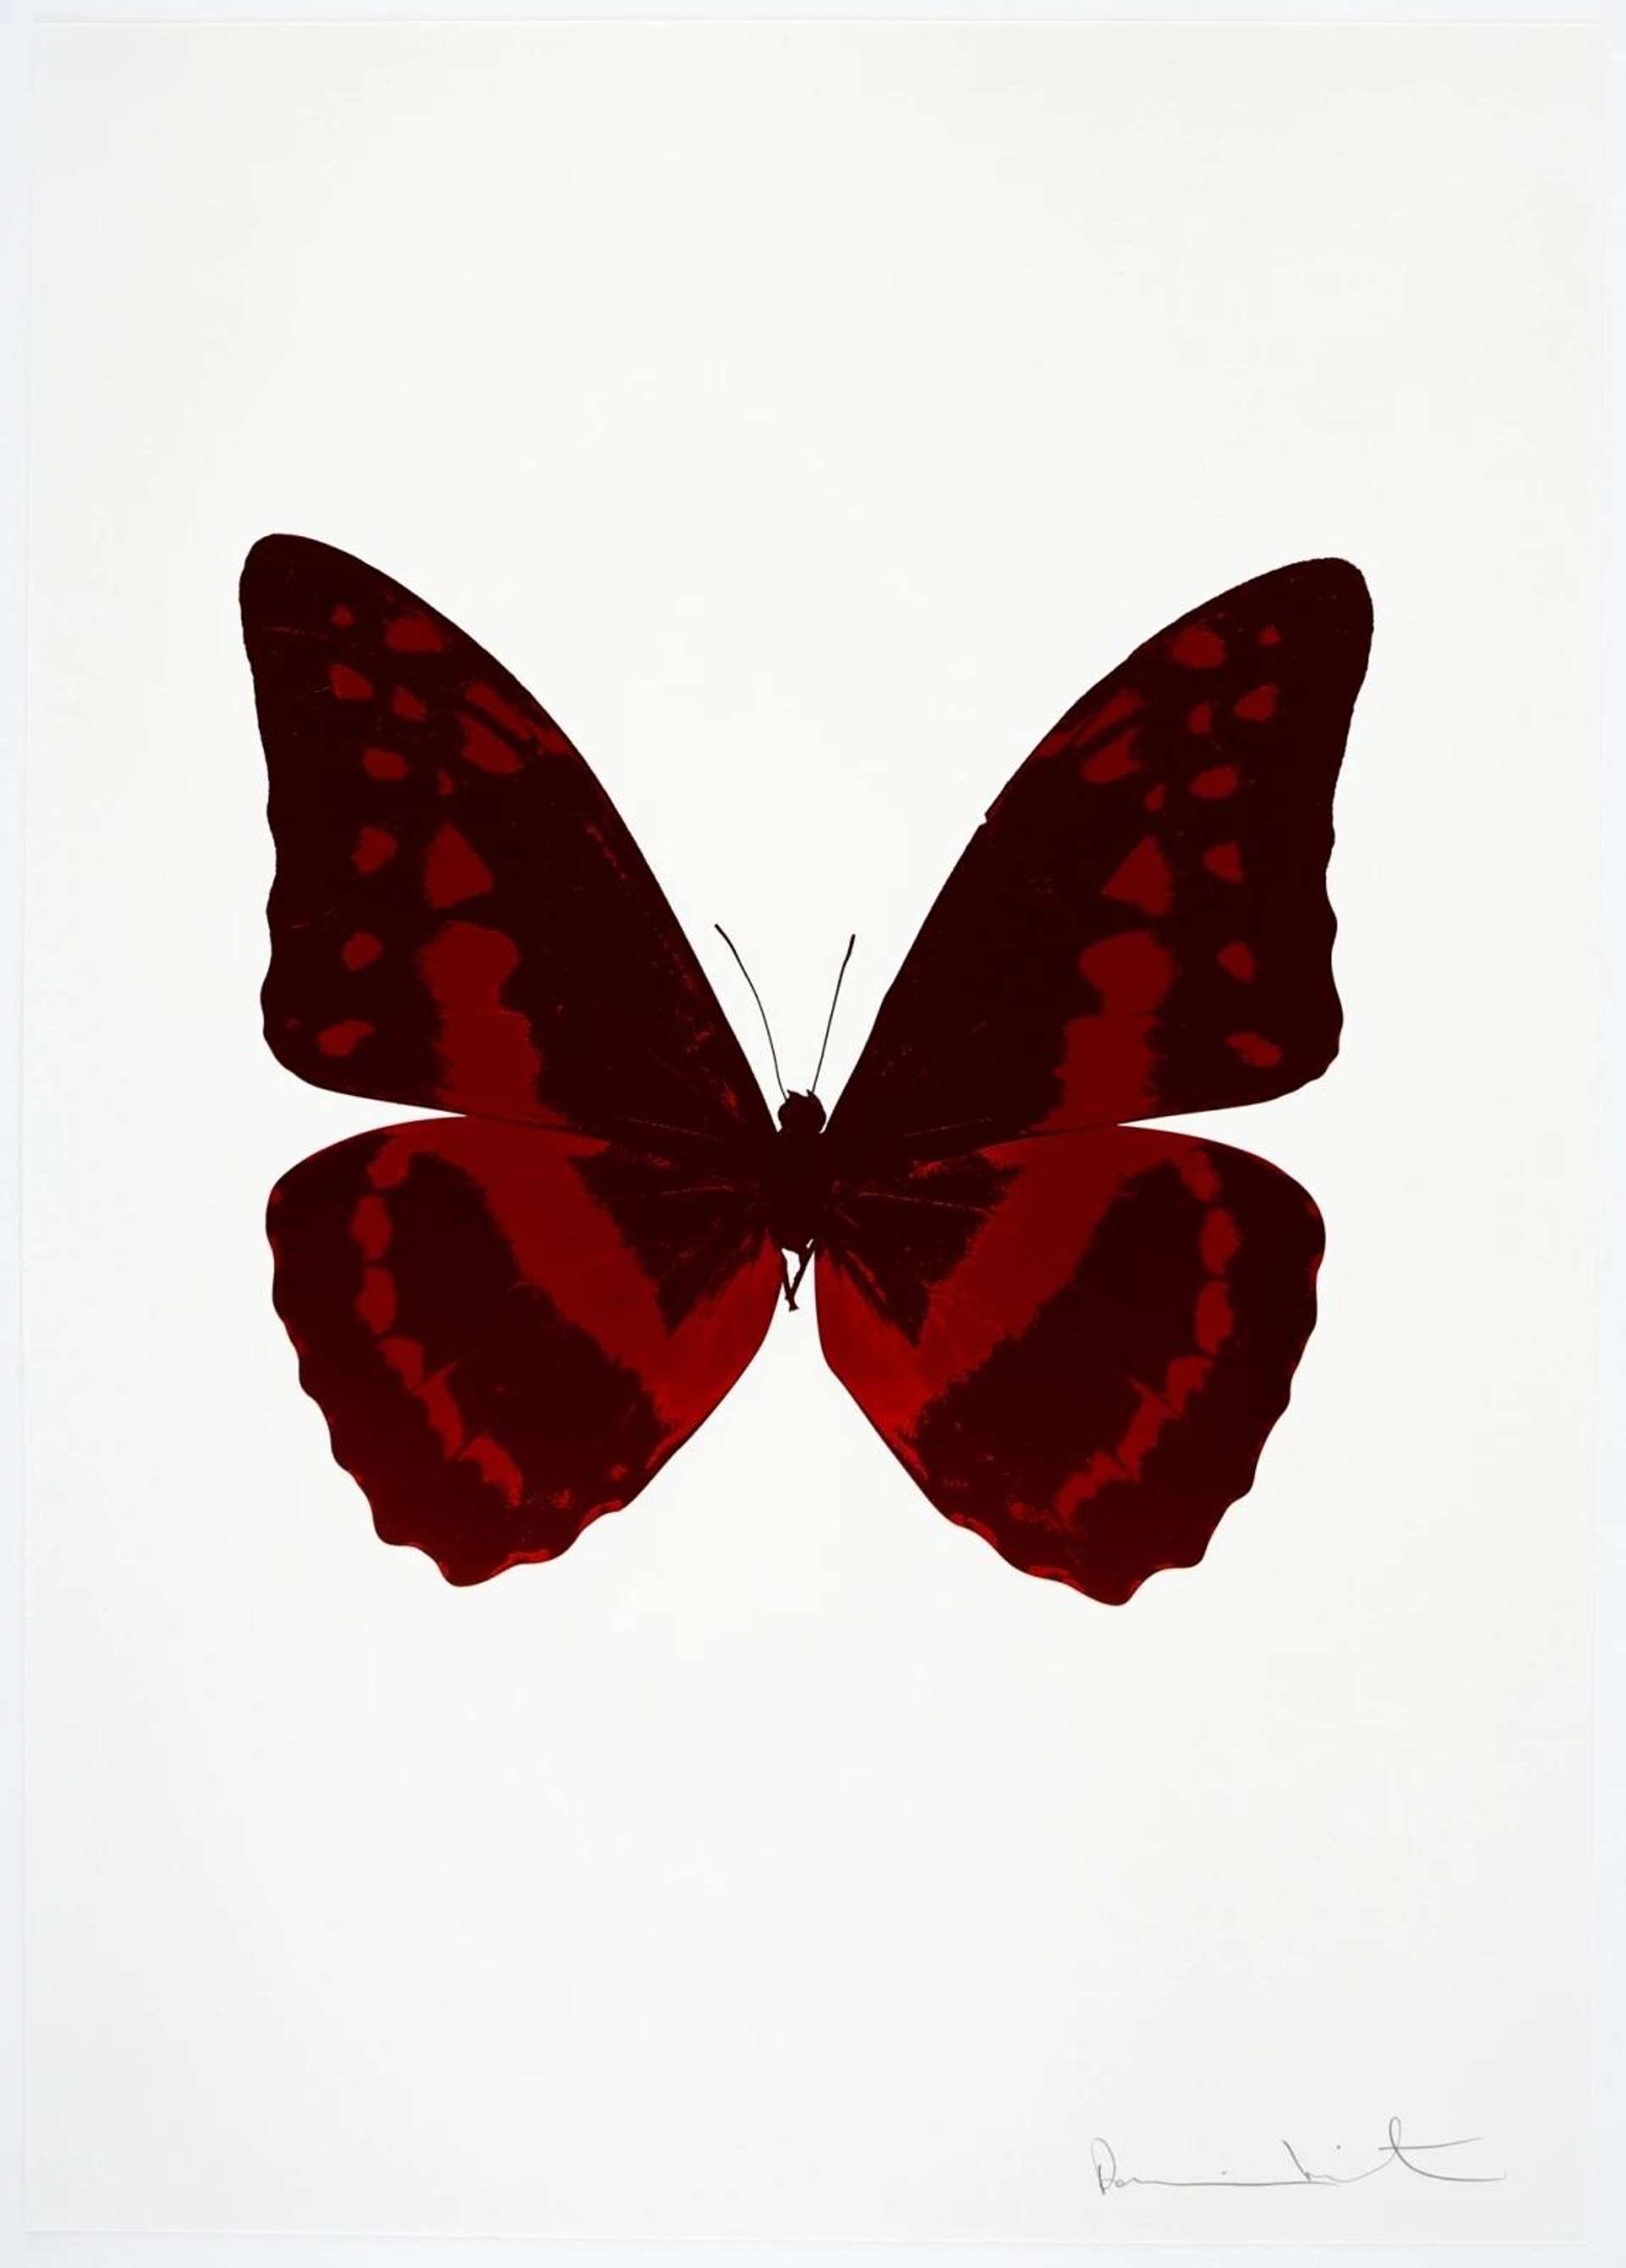 Damien Hirst: The Souls III (burgundy, chilli red) - Signed Print